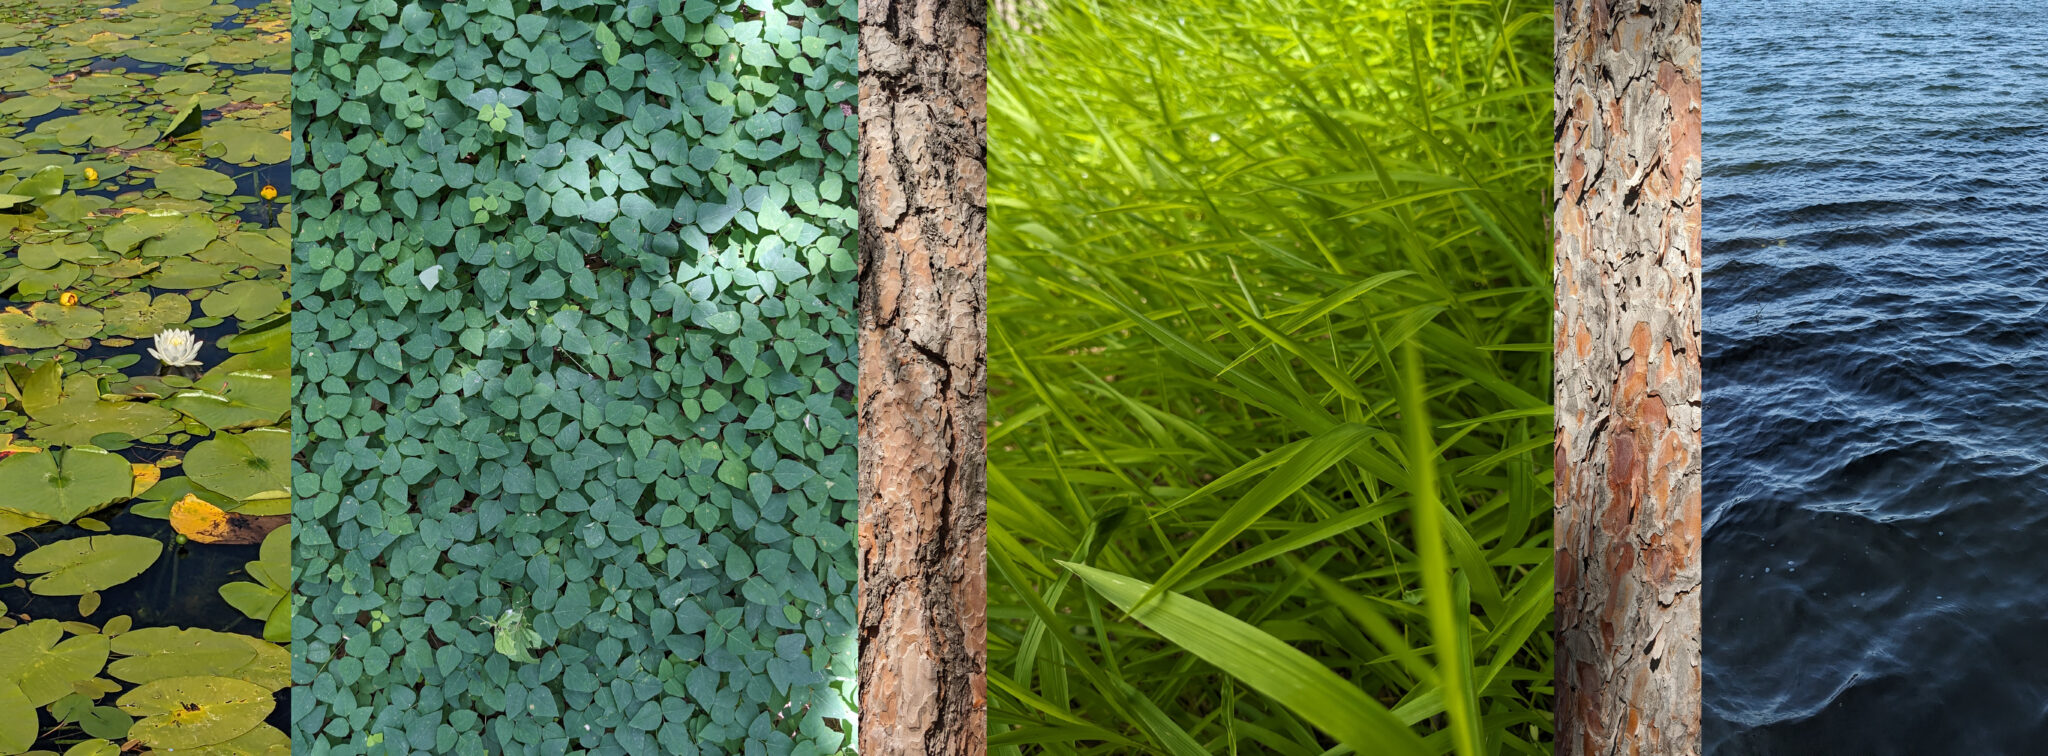 digital collage of 6 images lined up next to one another, showing lily pads, clovers, bark, grass, bark and water.